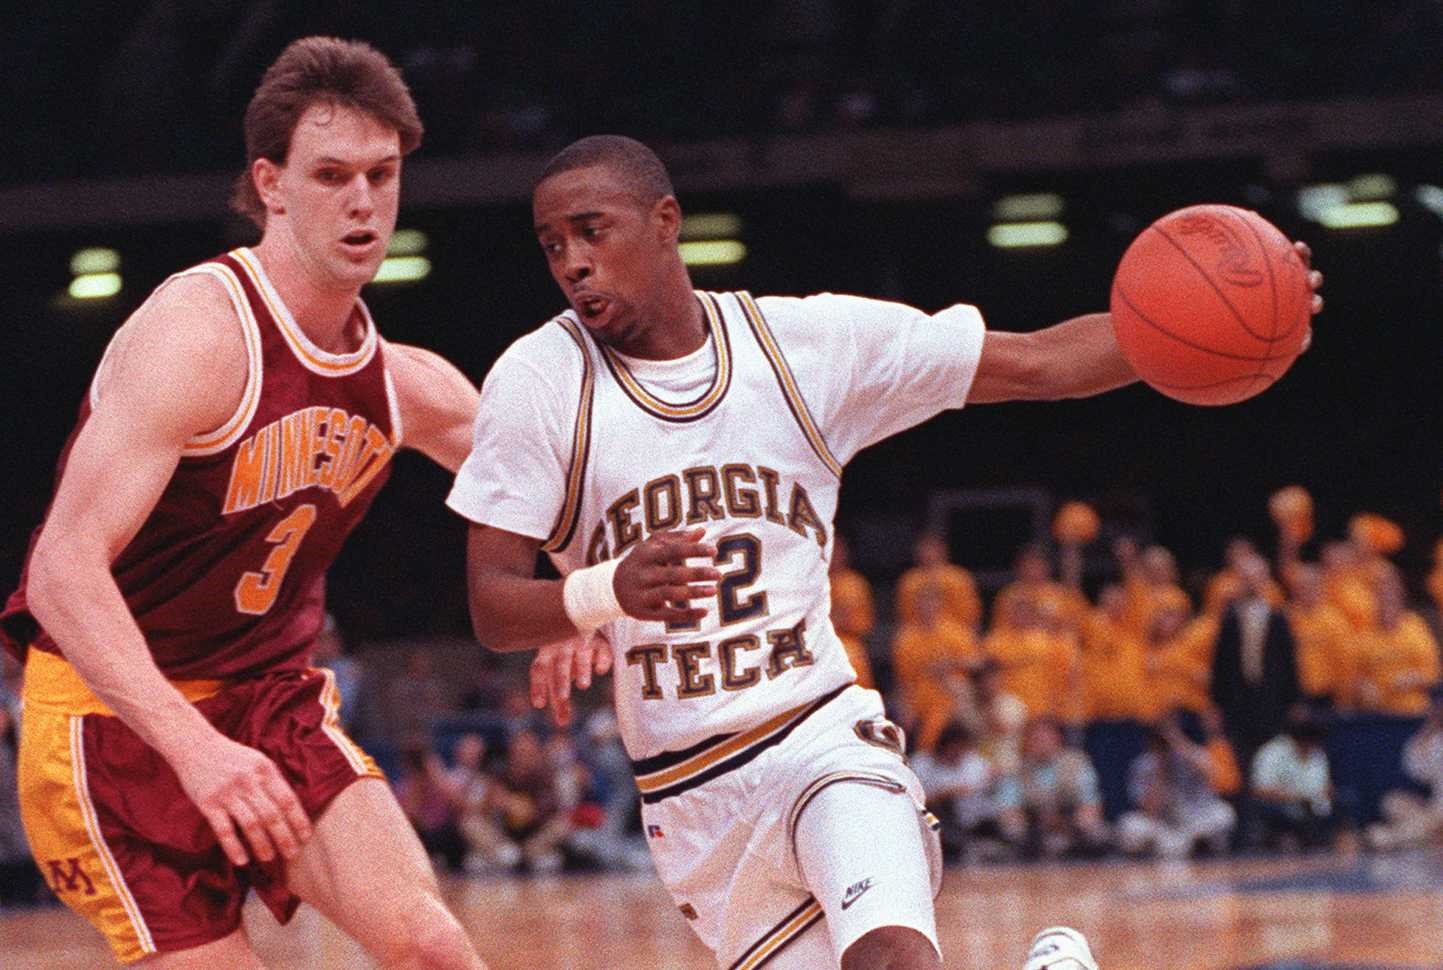 Kenny Anderson's road to recovery after a stroke nearly killed him